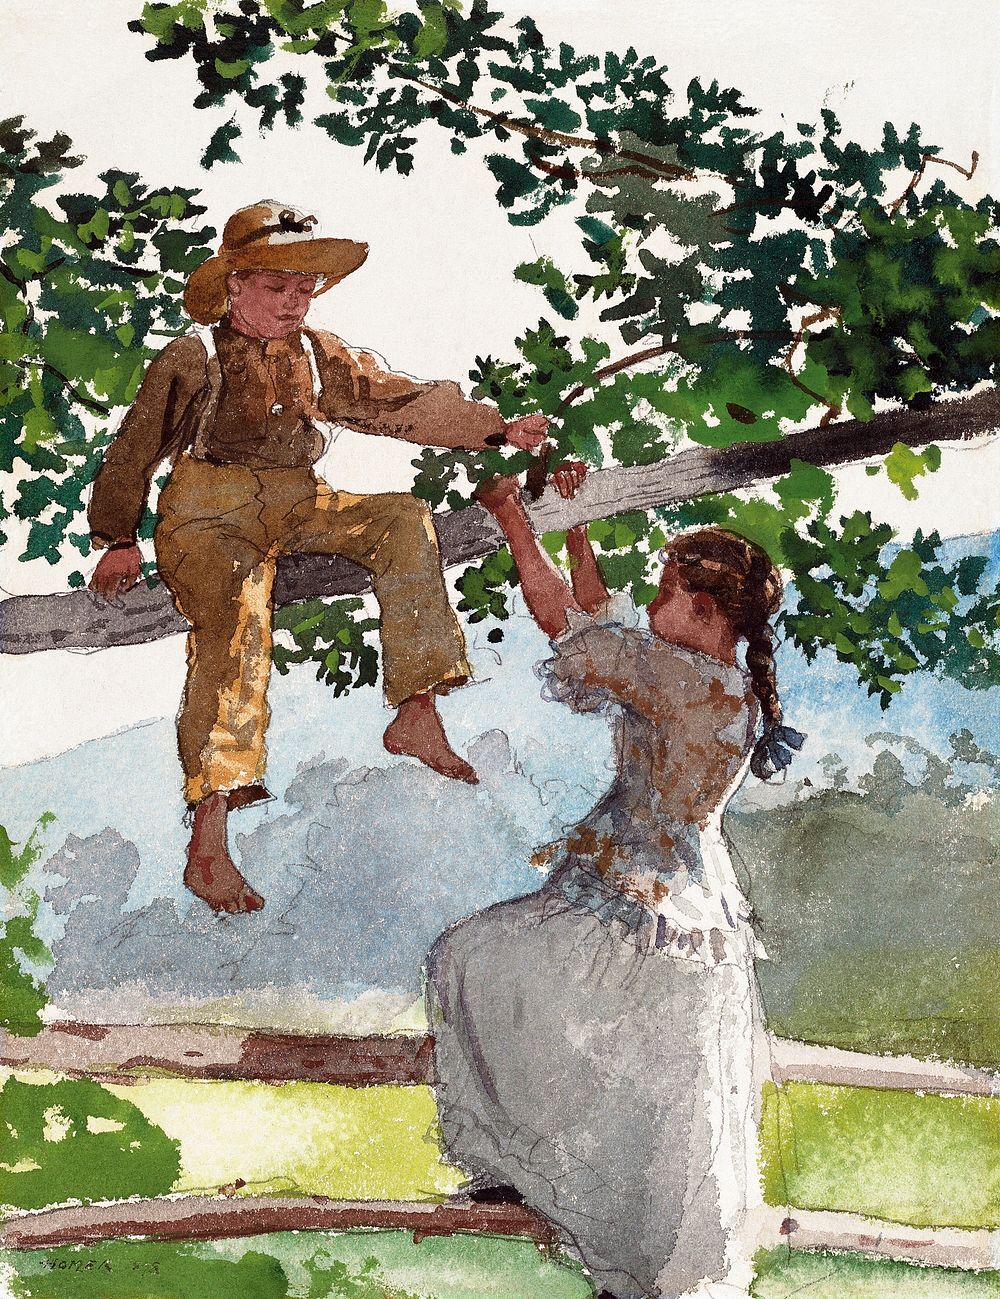 On the Fence (1878) by Winslow Homer. Original from The National Gallery of Art. Digitally enhanced by rawpixel.